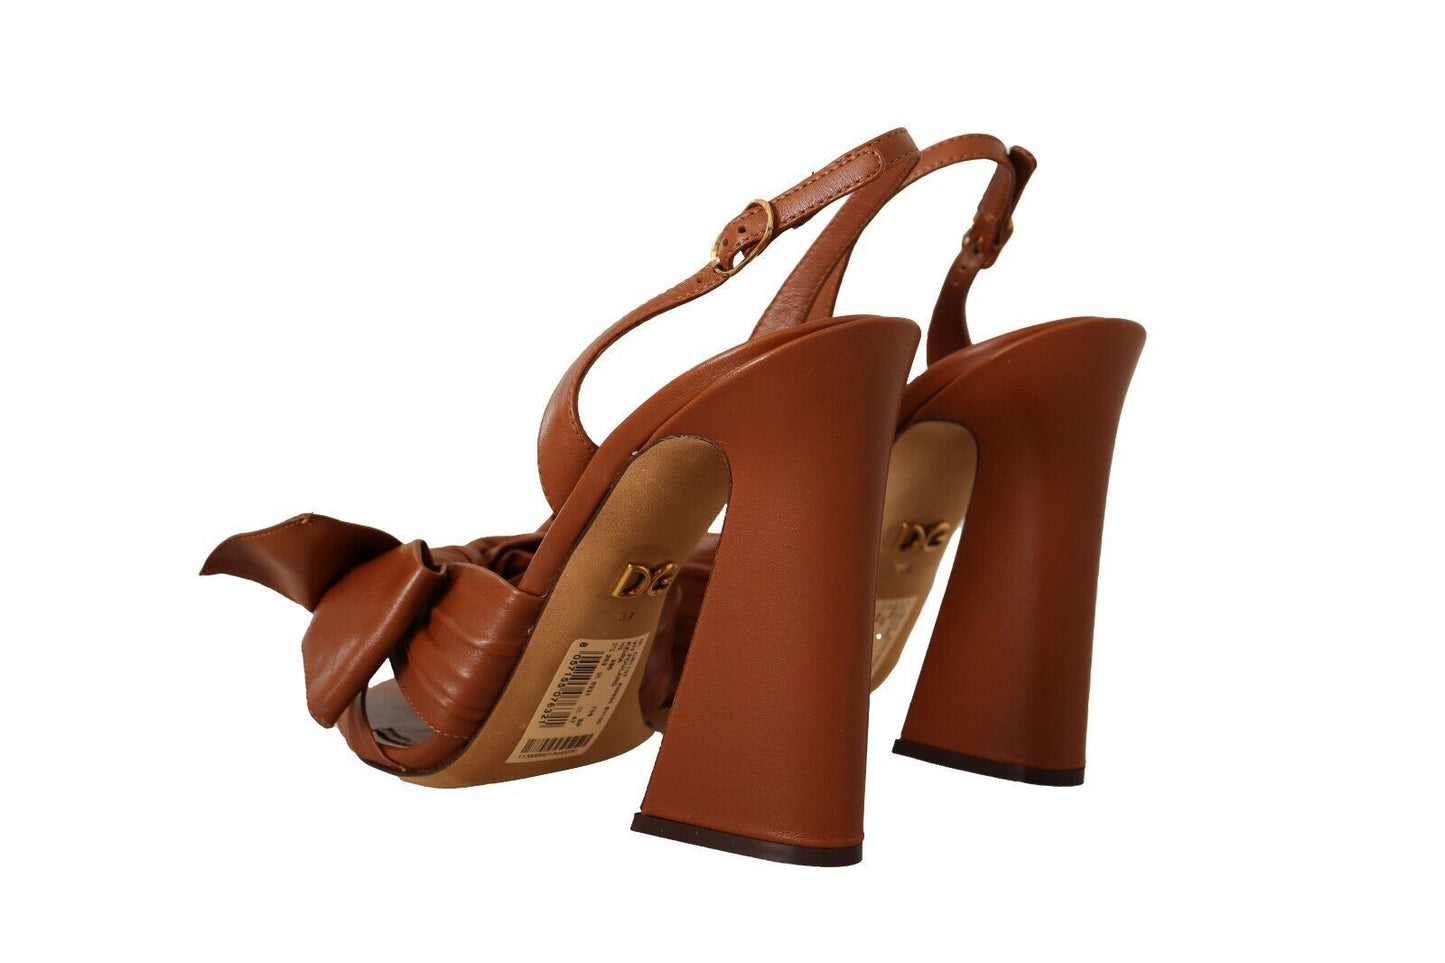 Elegant Brown Ankle Strap Heels with Bow Detail